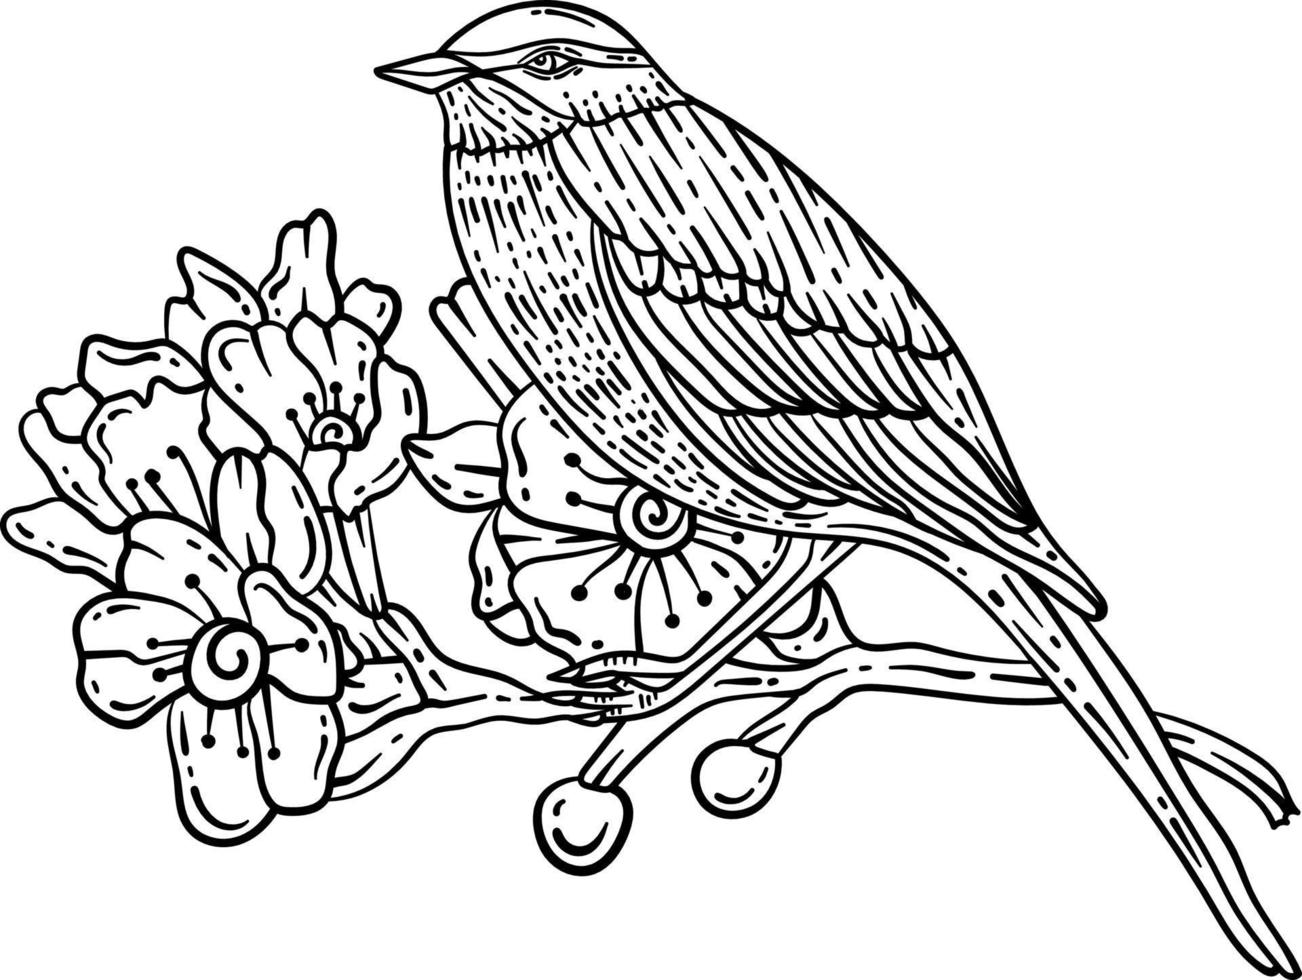 Bird Branch Spring Coloring Page for Adults vector